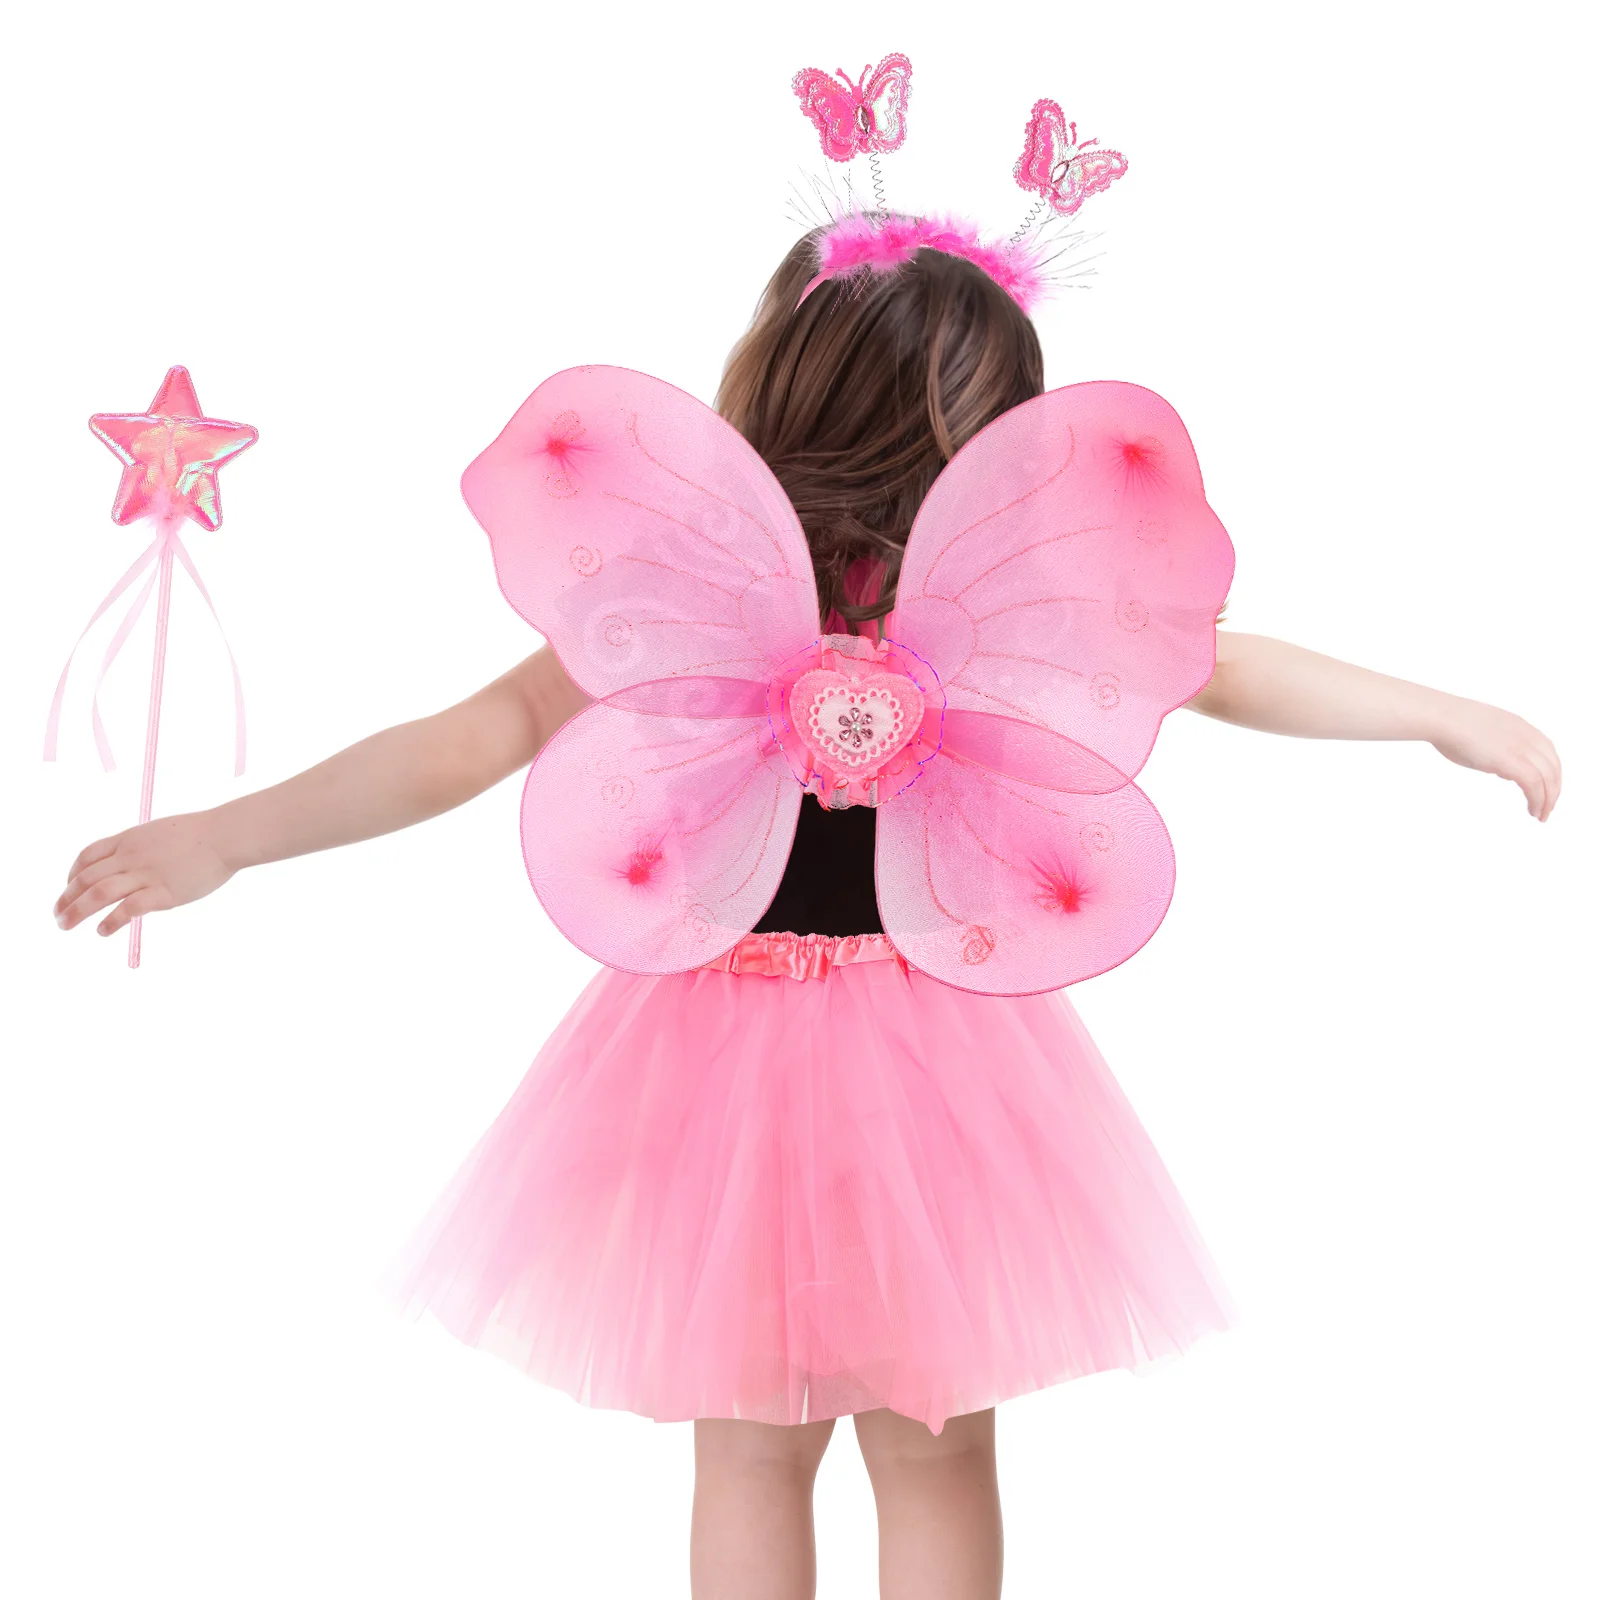 

Butterfly Wings Four Piece Set Cosplay Costume Fairy Skirt Hairhoop Lace Wand Stockings Headband Girl Stick Mesh Tutu